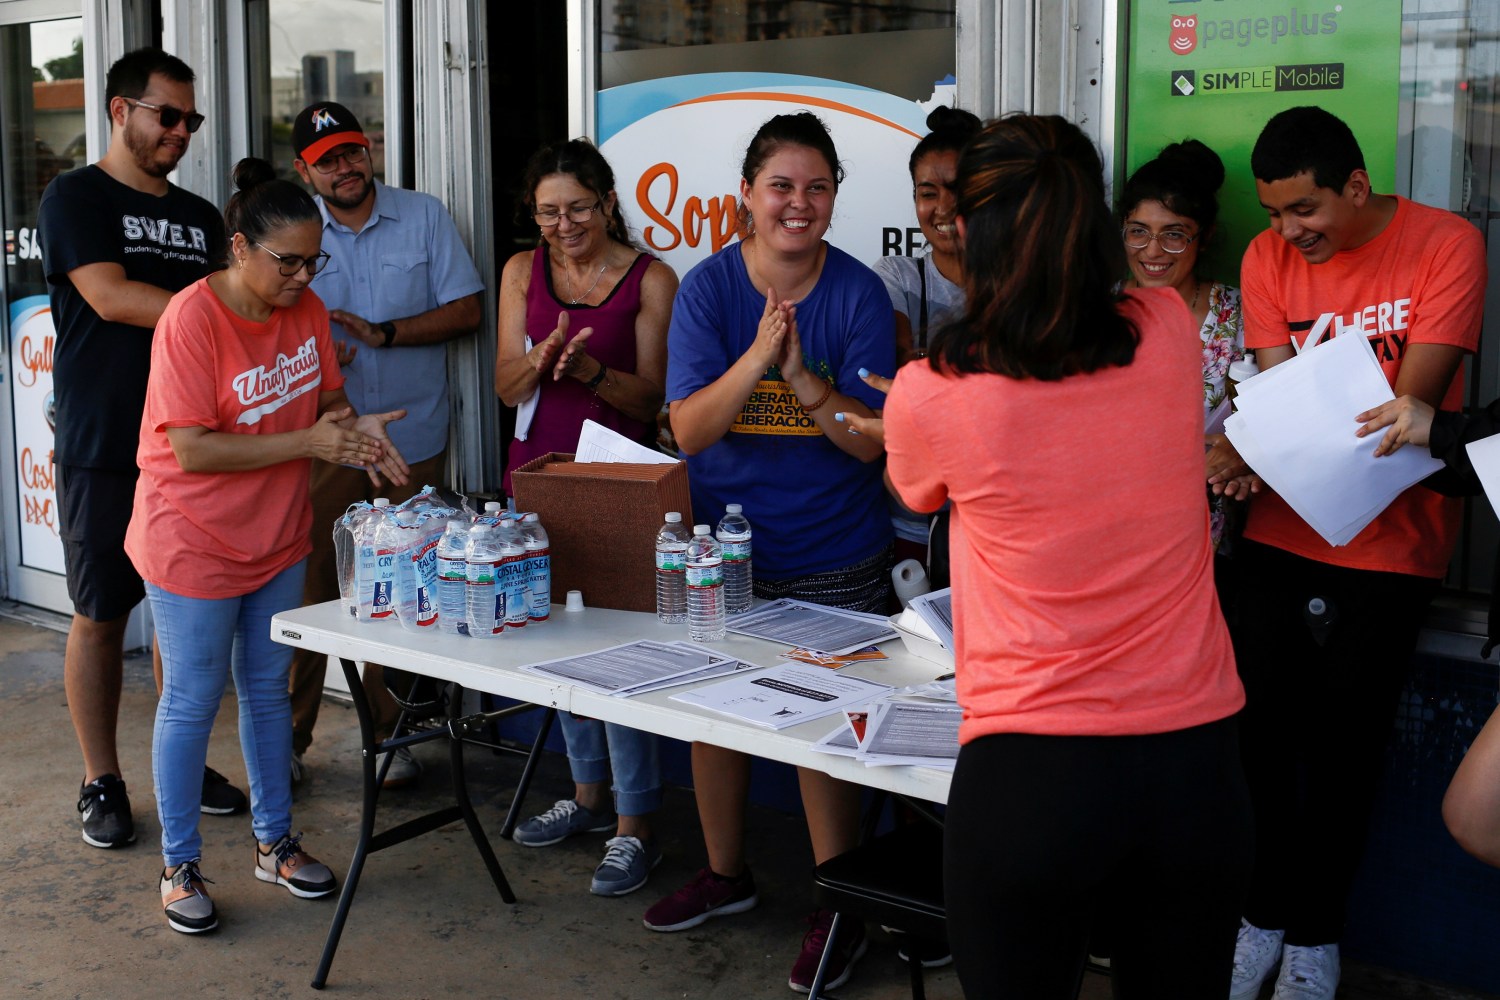 Immigration rights activists meet during a event to hand out pamphlets as communities braced for a reported wave of deportation raids across the United States by Immigration and Customs Enforcement officers, in Miami, Florida, U.S. July 13, 2019.  REUTERS/Marco Bello - RC1E69650CB0